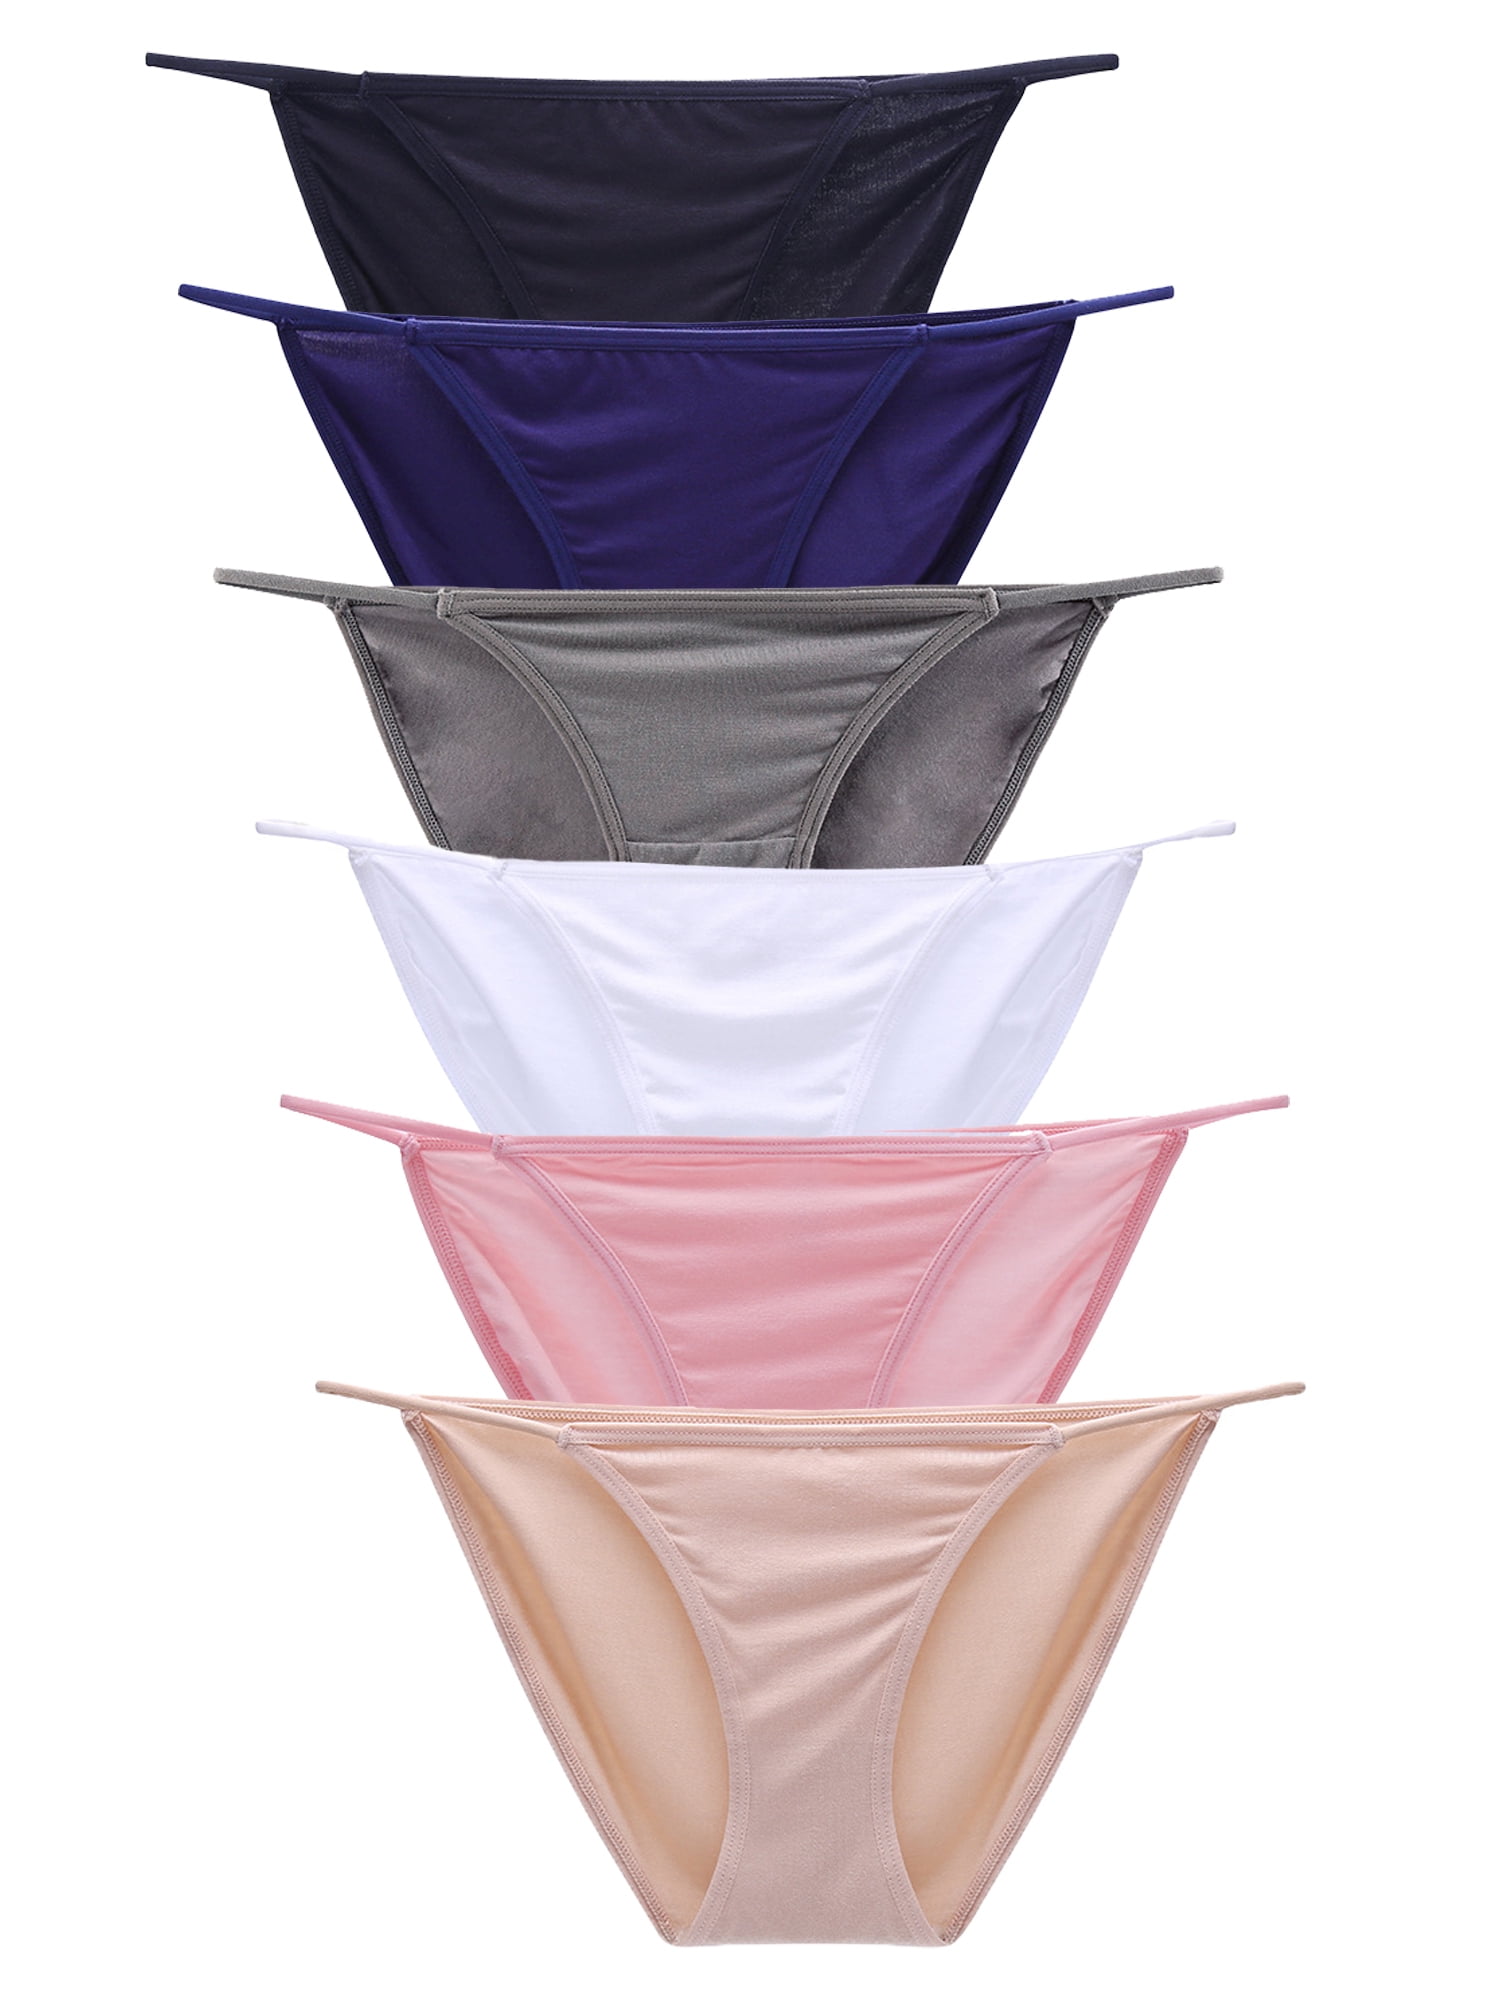 BIONEK 6-Pack Lace Thongs Women's Sexy Panties Stretchy Cheeky Underwear